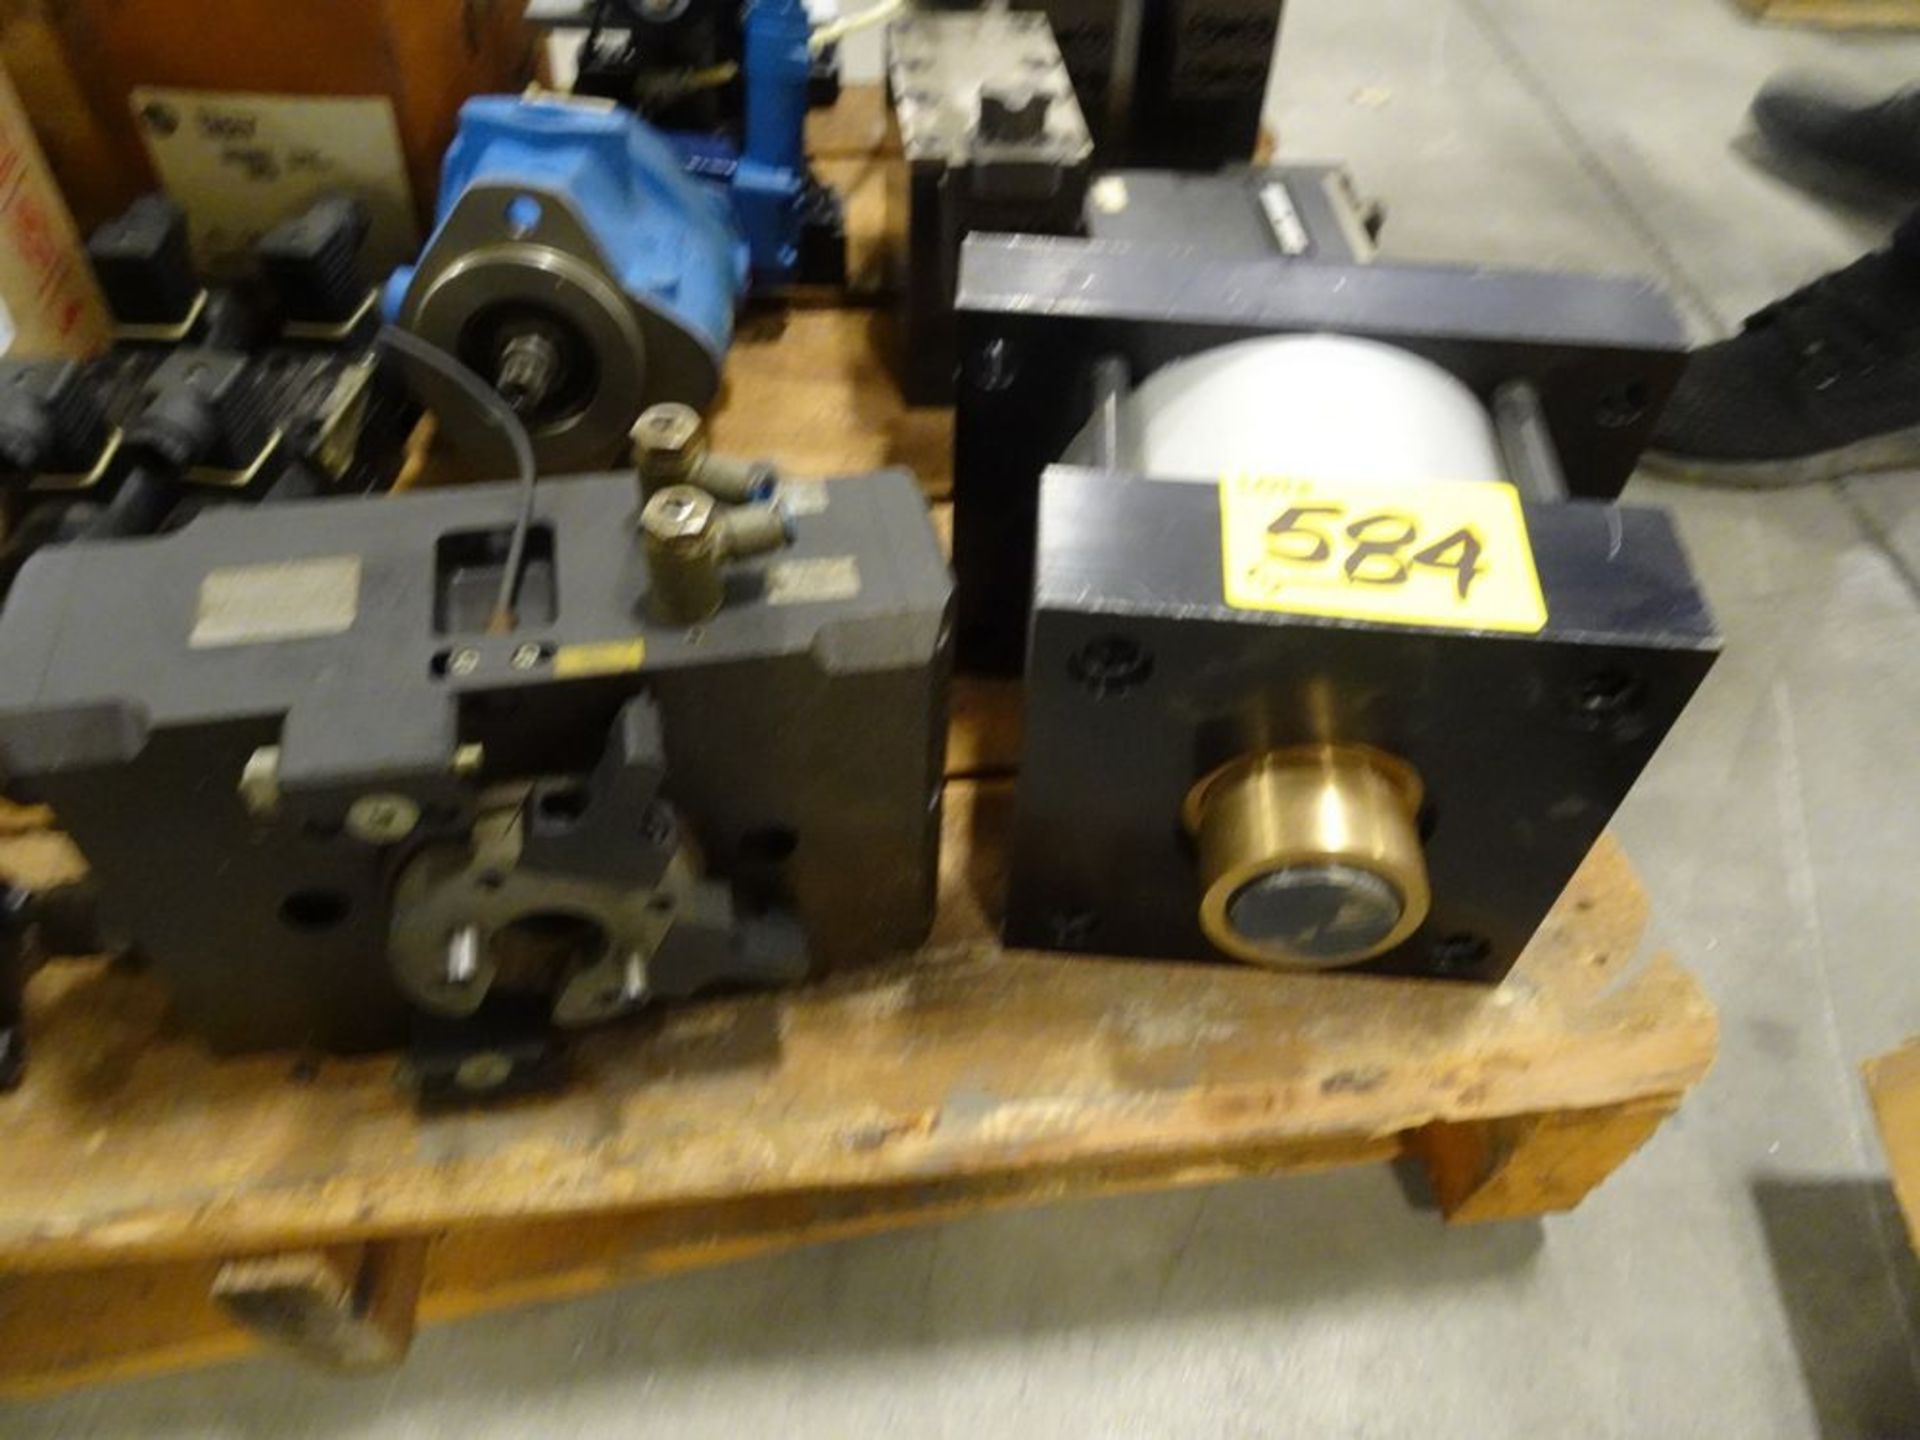 ASSORTED PRODUCT, CYLINDERS, VALVES, DRIVES, ETC. - Image 2 of 6